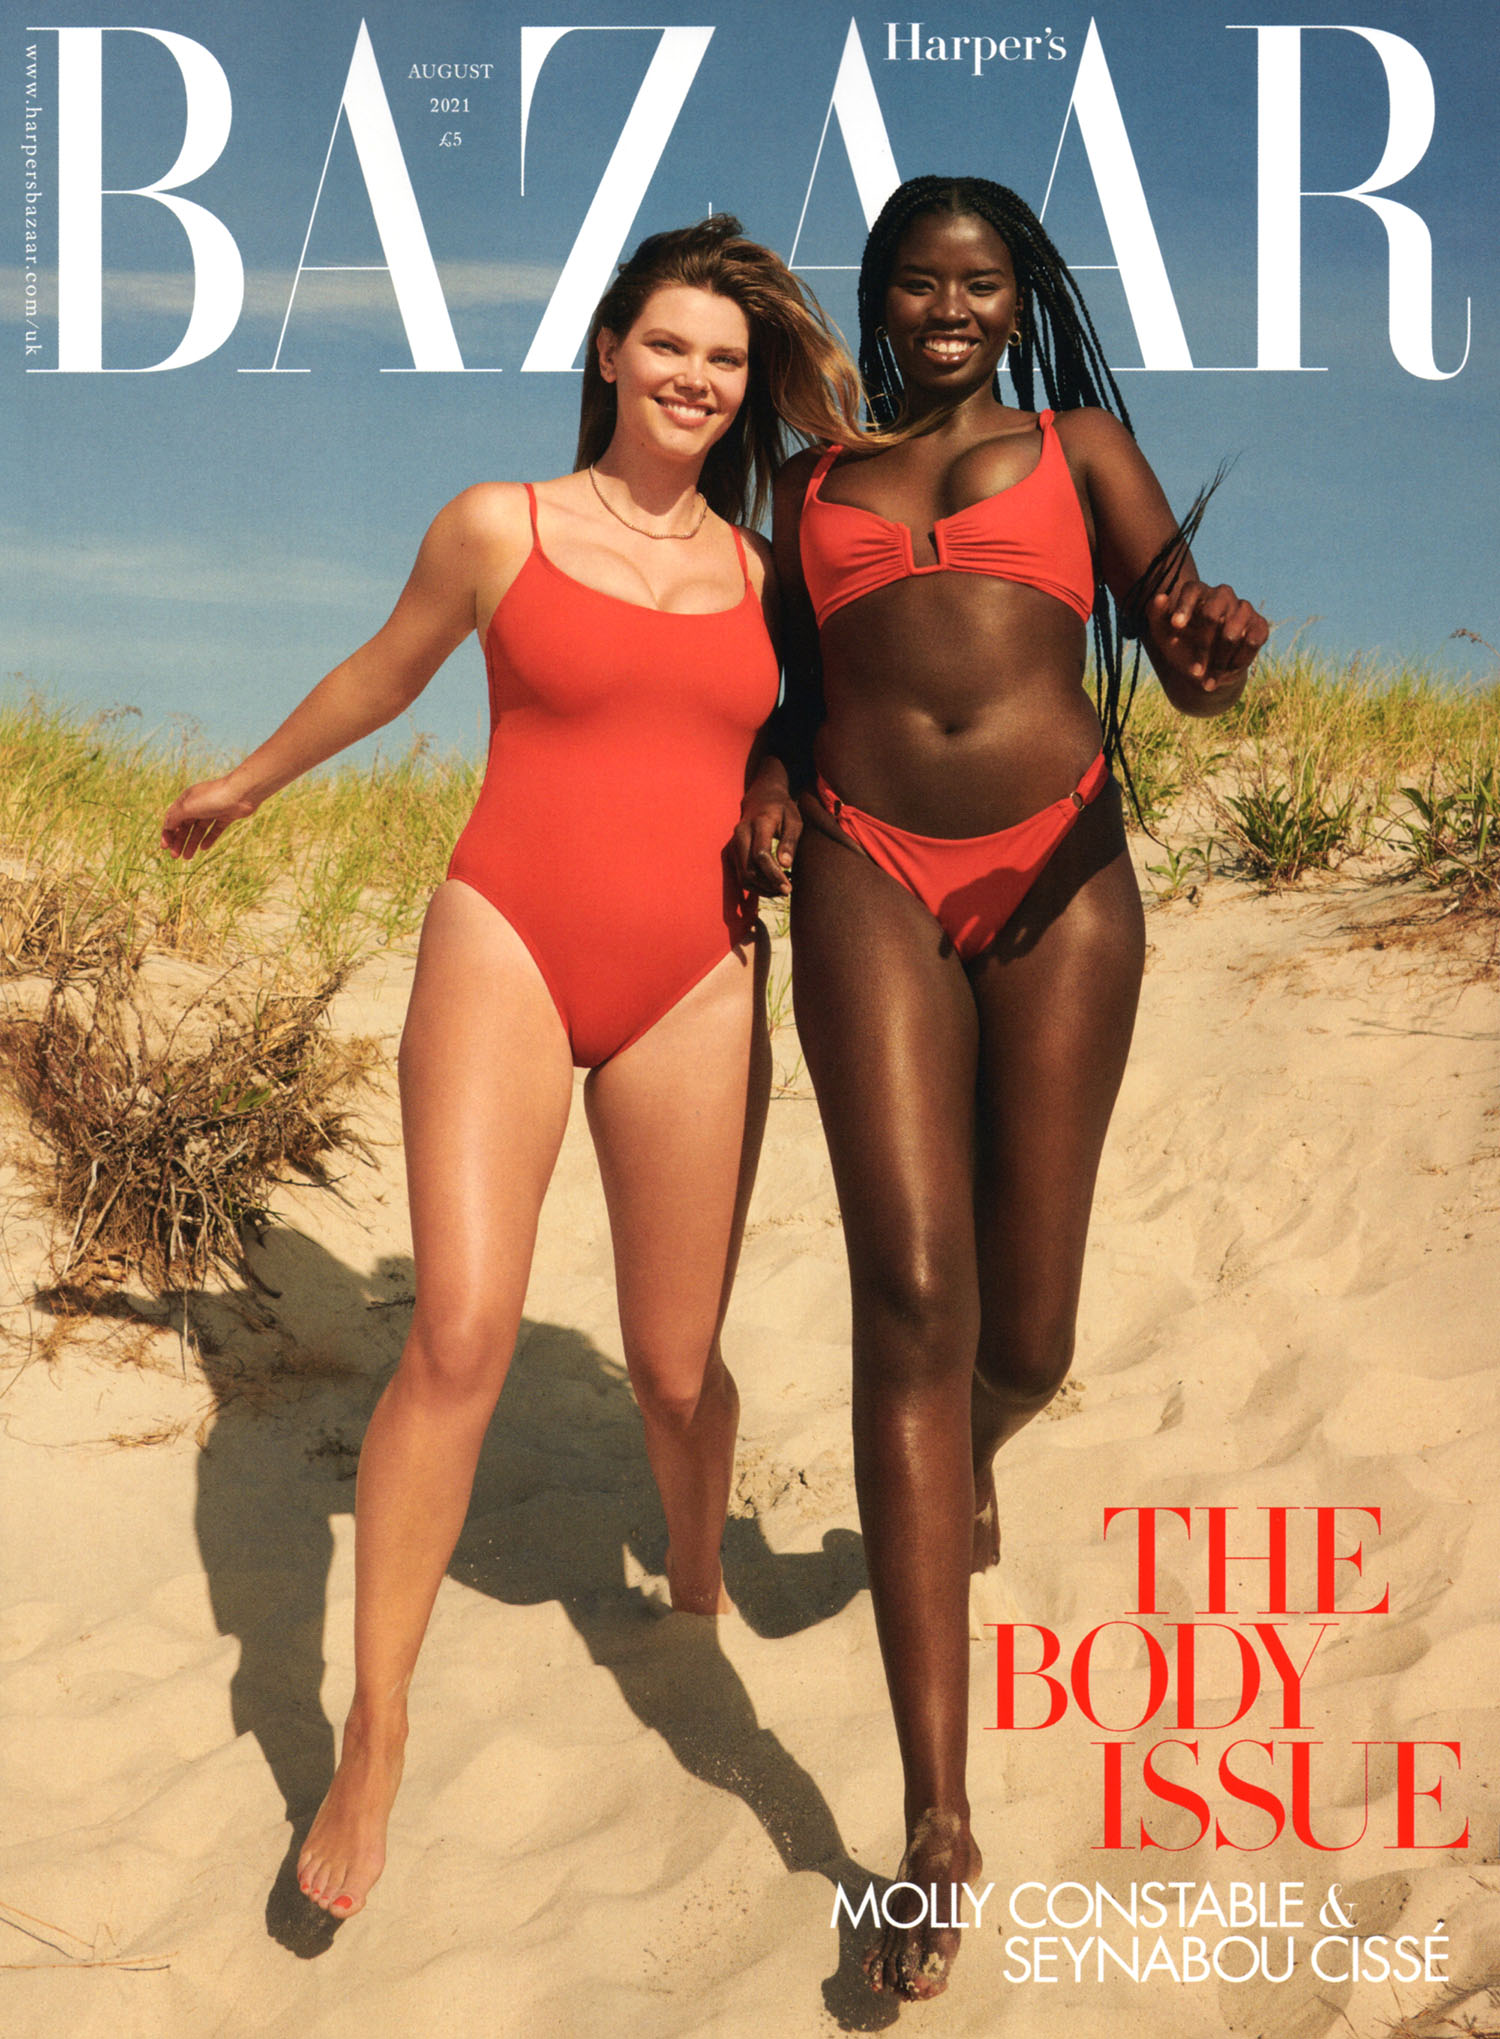 Seynabou Cisse and Molly Constable covers Harper’s Bazaar UK August 2021 by Pamela Hanson